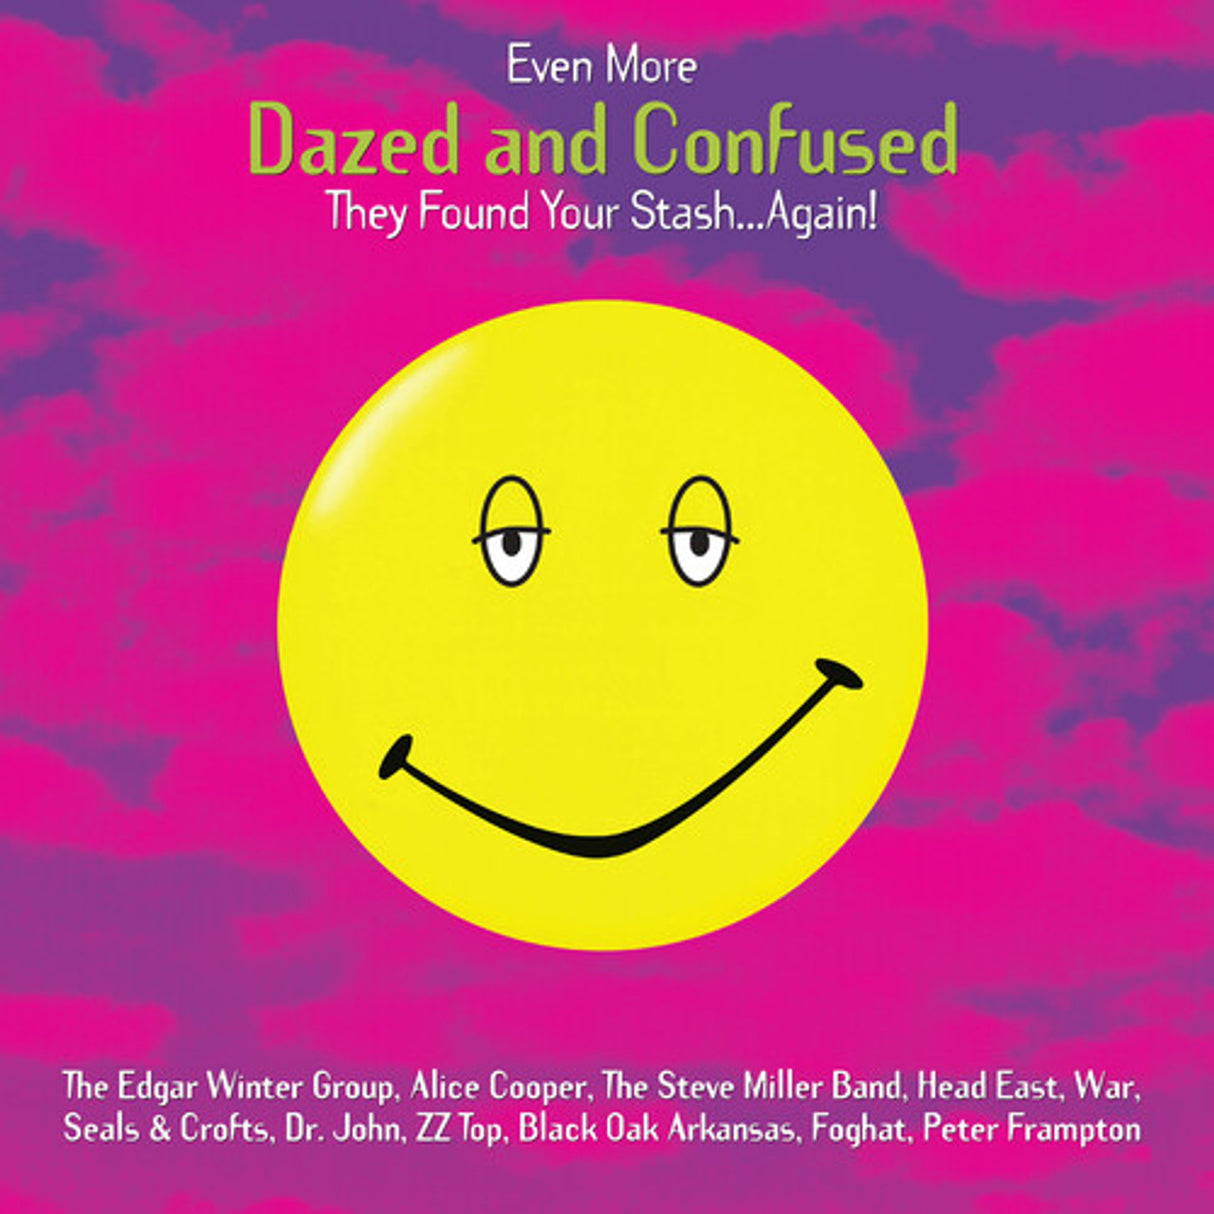 EVEN MORE DAZED AND CONFUSED (MUSIC FROM) / VAR - EVEN MORE DAZED AND CONFUSED (MUSIC FROM) / VAR (RSD 42024) [Vinyl]